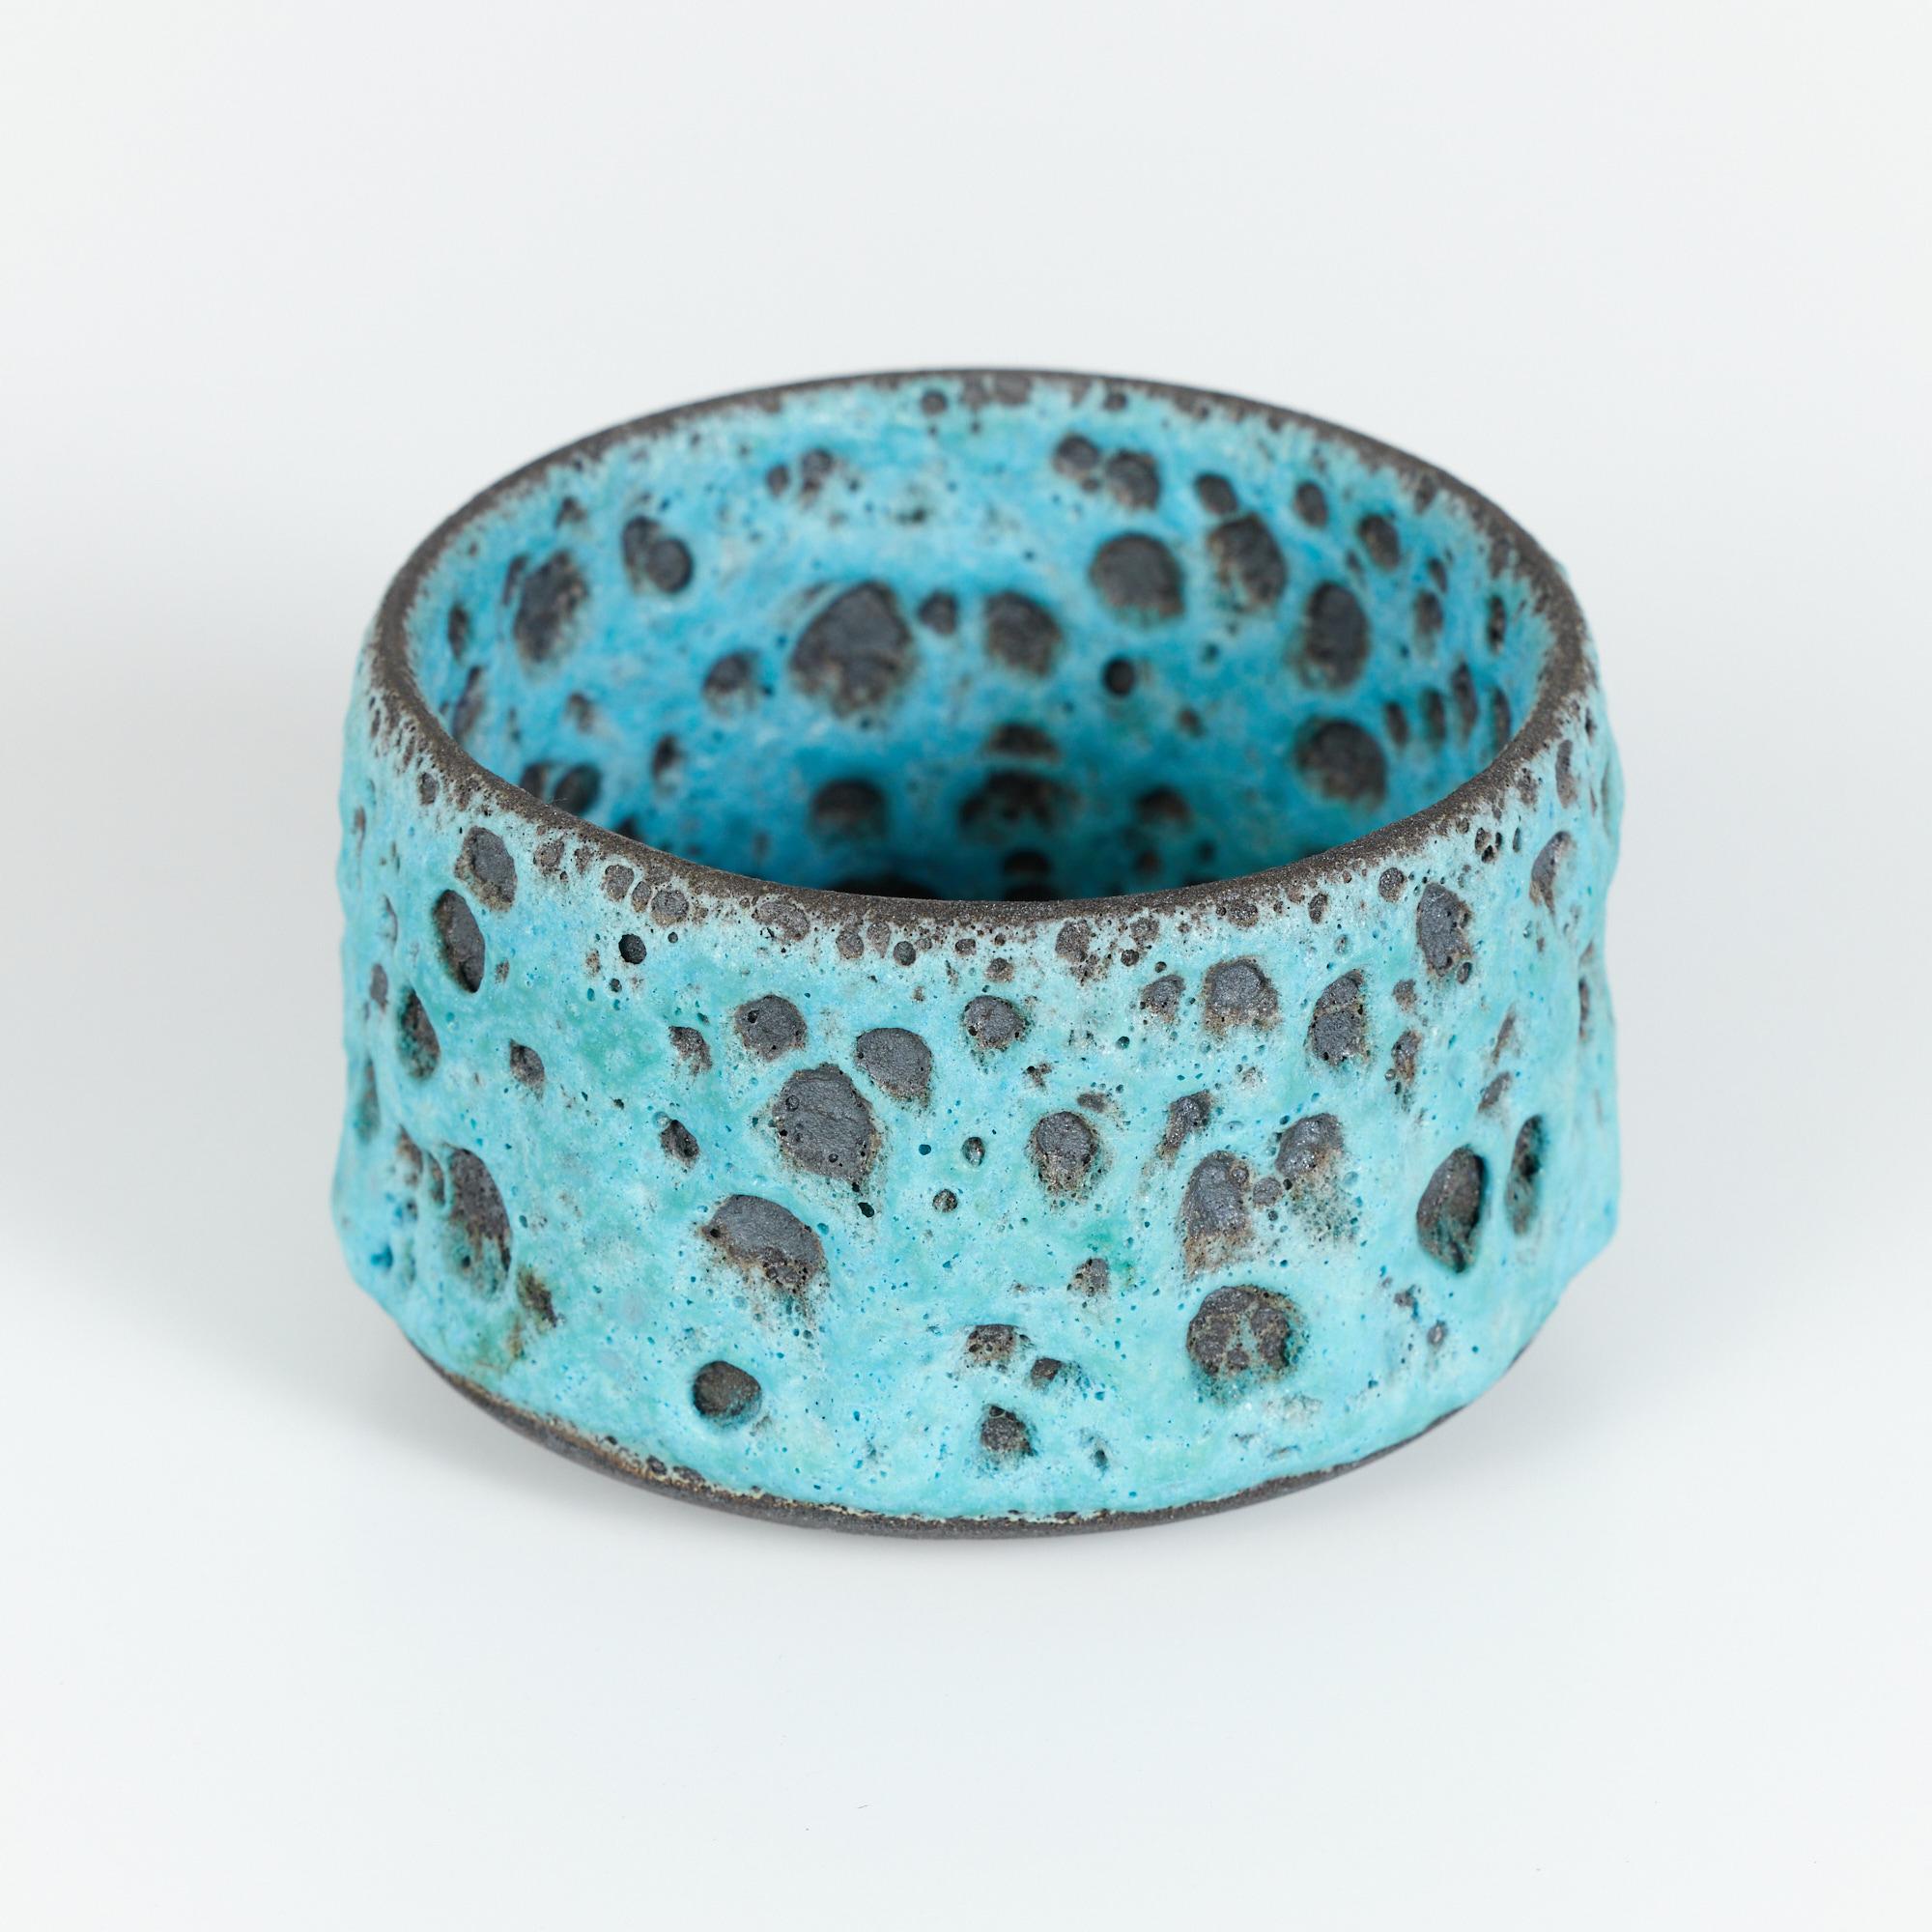 Ocean inspired ceramic bowl with steep sides. This piece showcases a blue chemistry glazed interior and exterior. The texture most resembles a sea coral or lava rock.

Dimensions
4.5